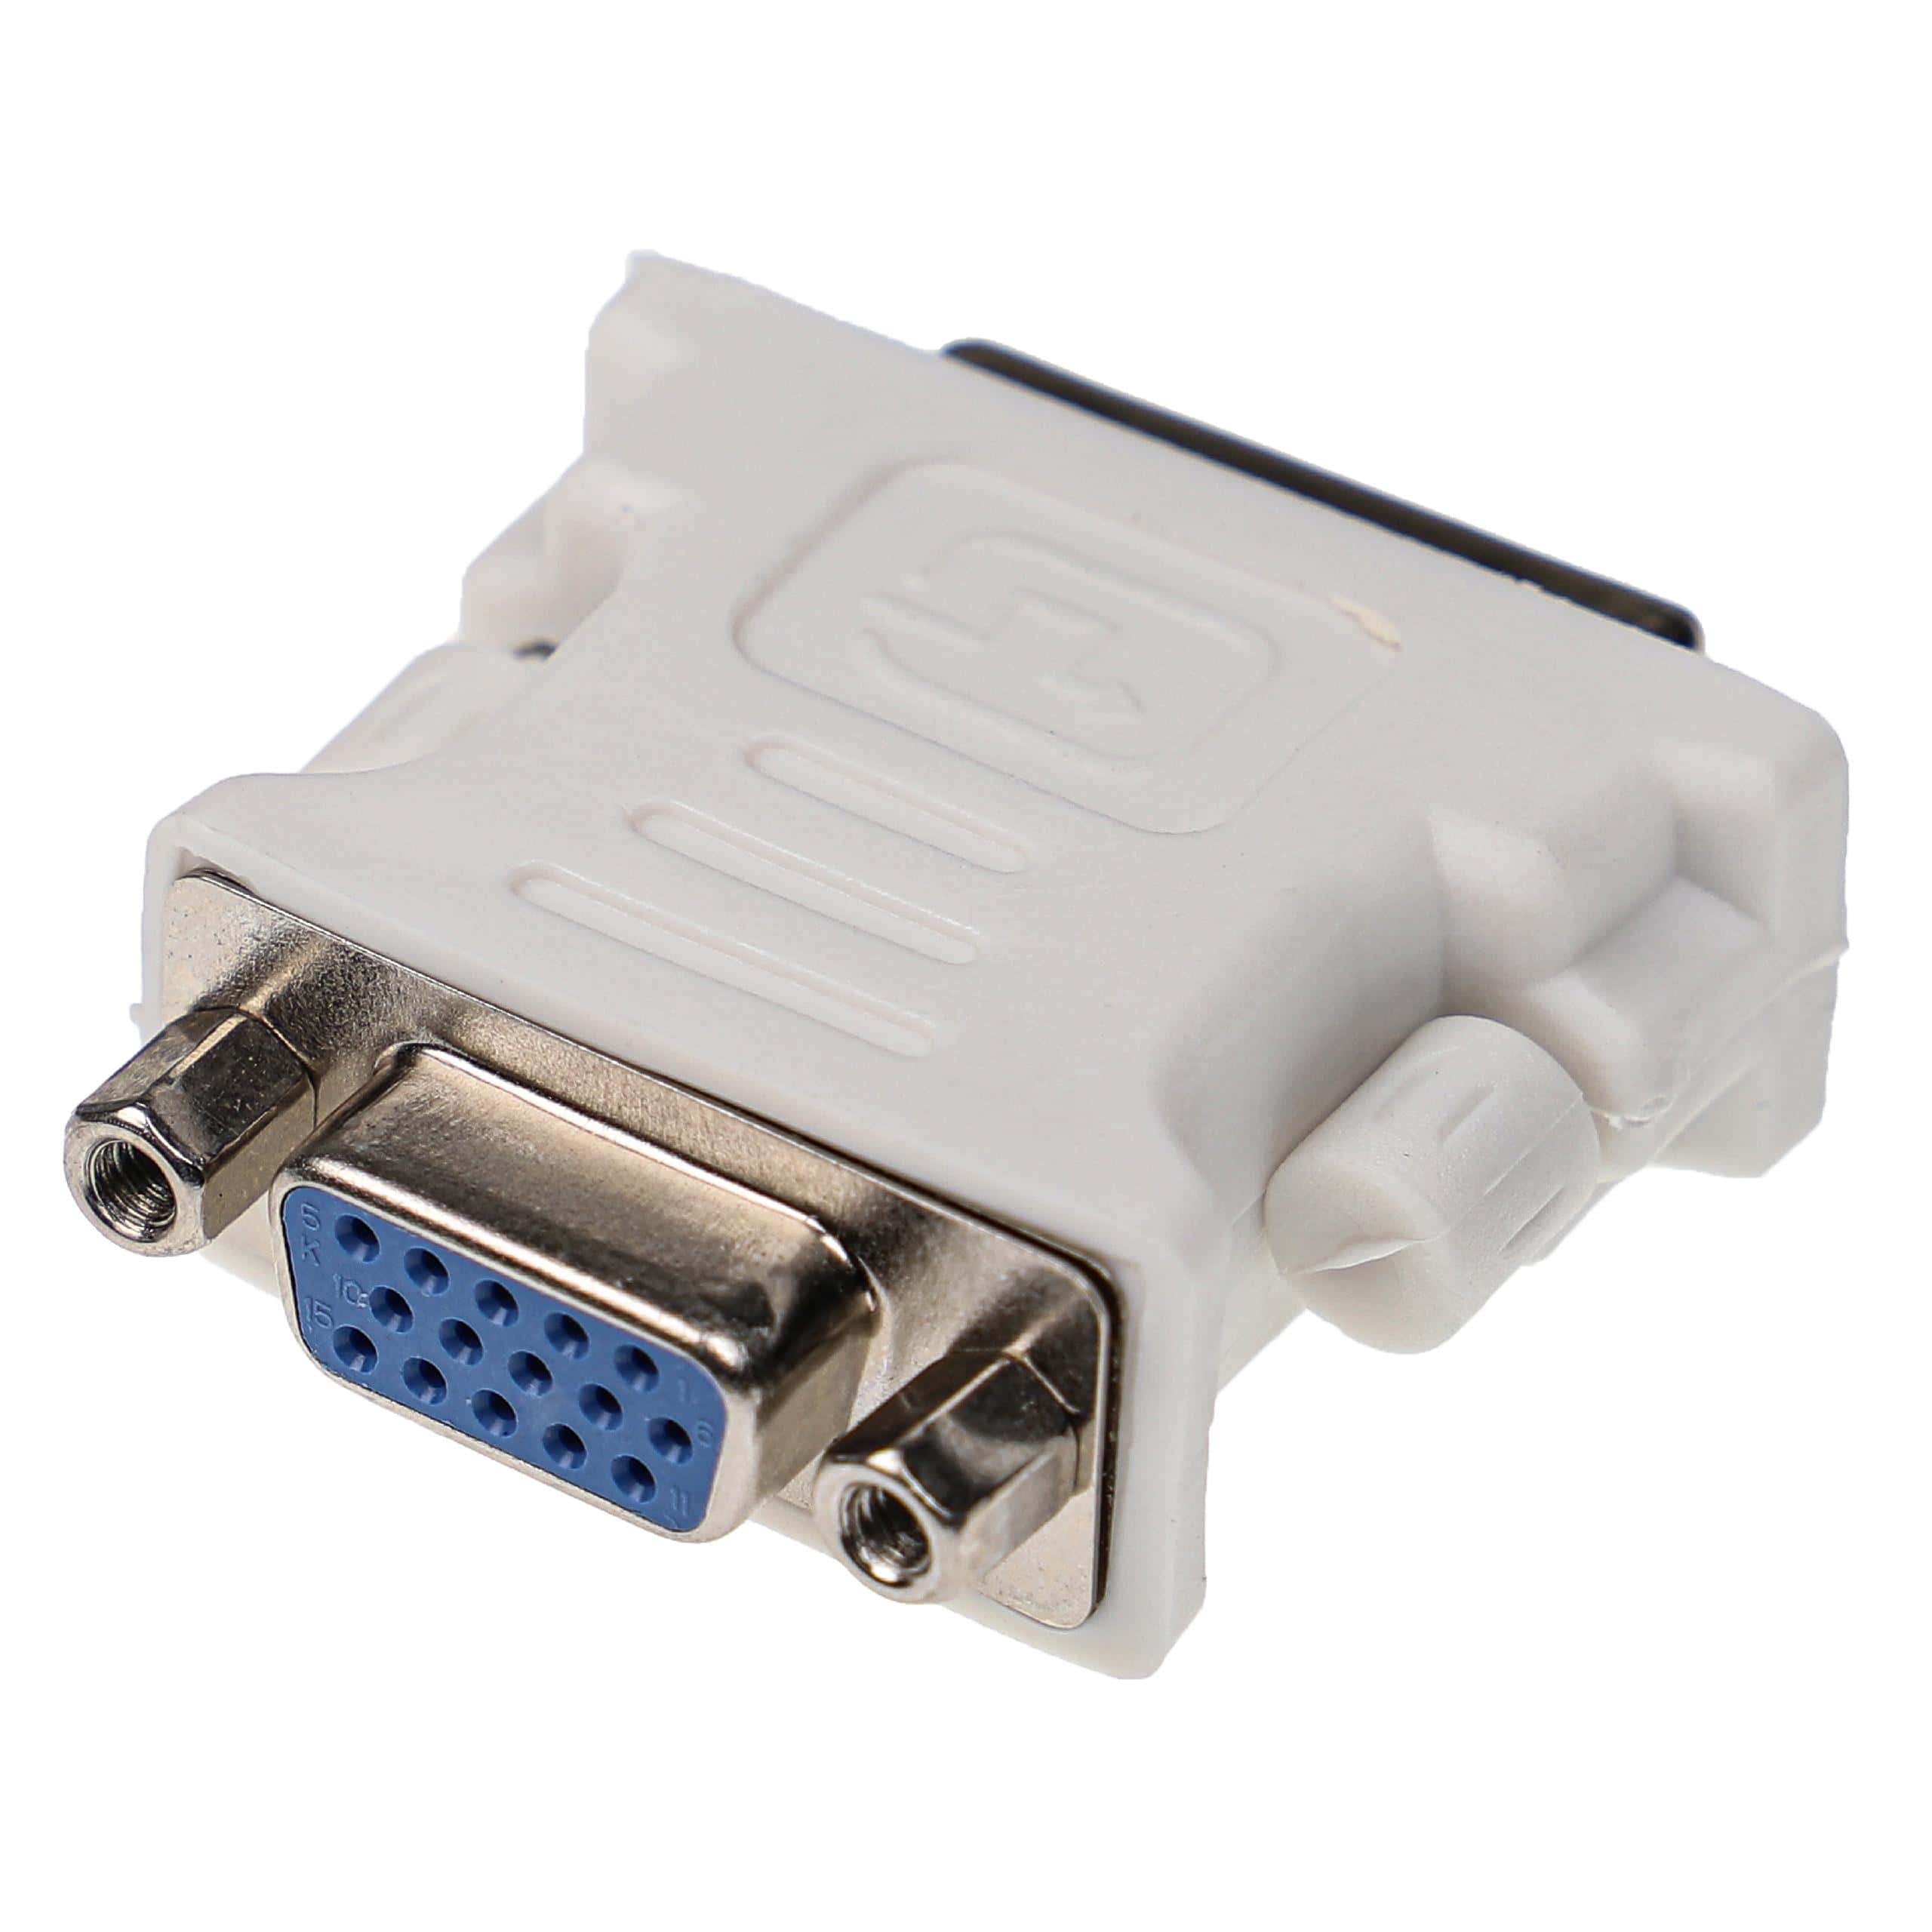 vhbw DVI Plug to VGA Socket Adapter for Connecting DVI Systems to VGA Appliances - Adapter Cable Grey